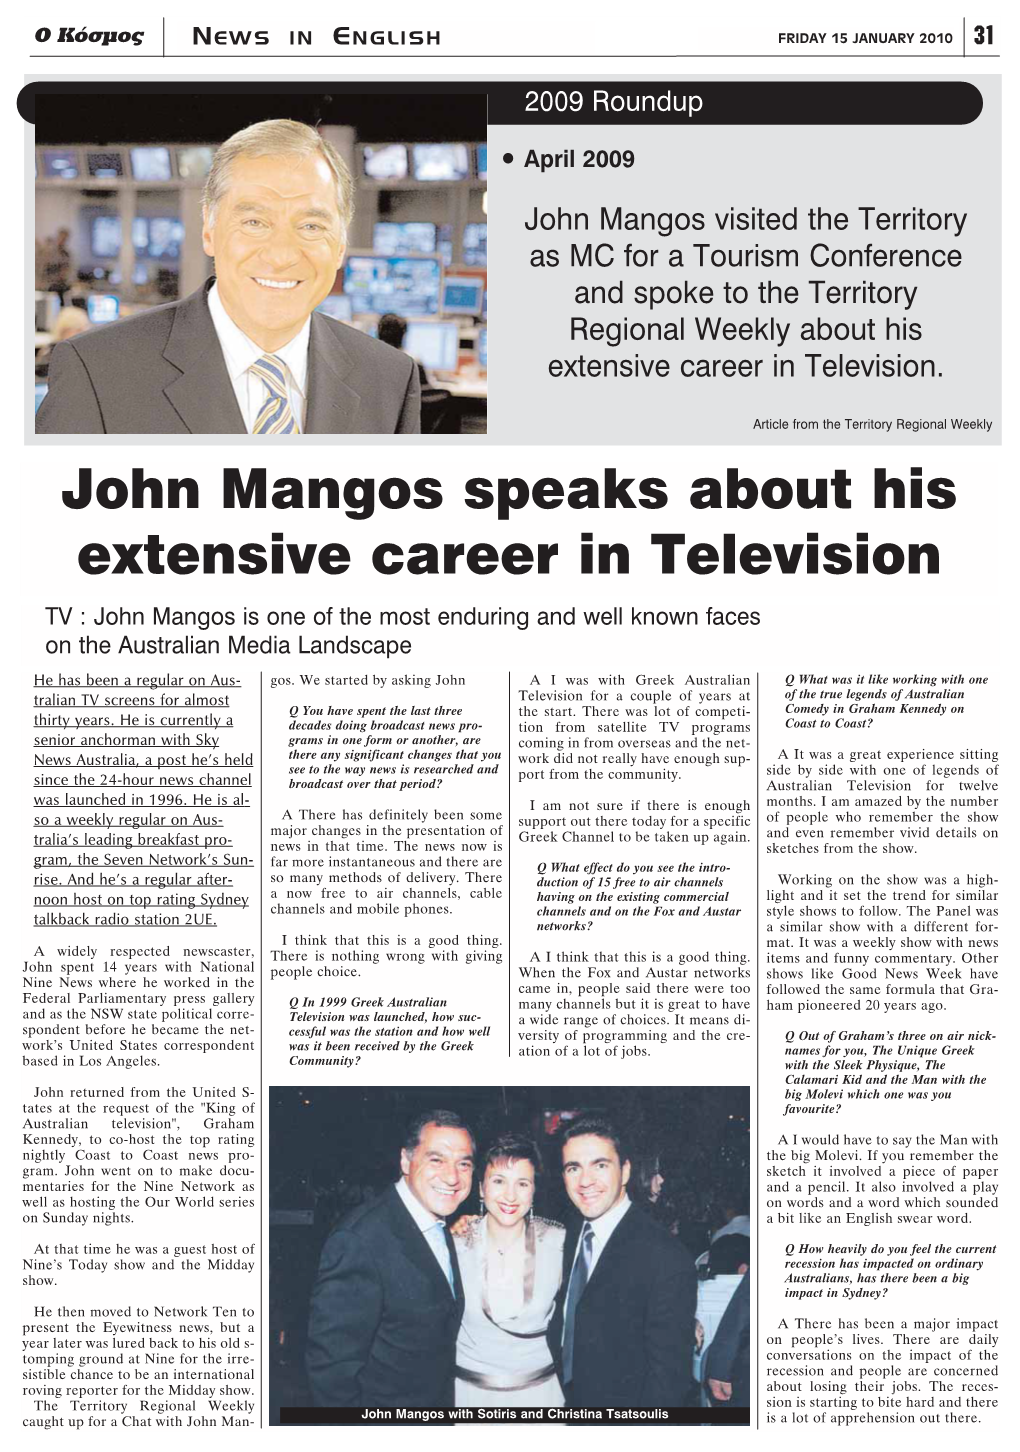 John Mangos Speaks About His Extensive Career in Television